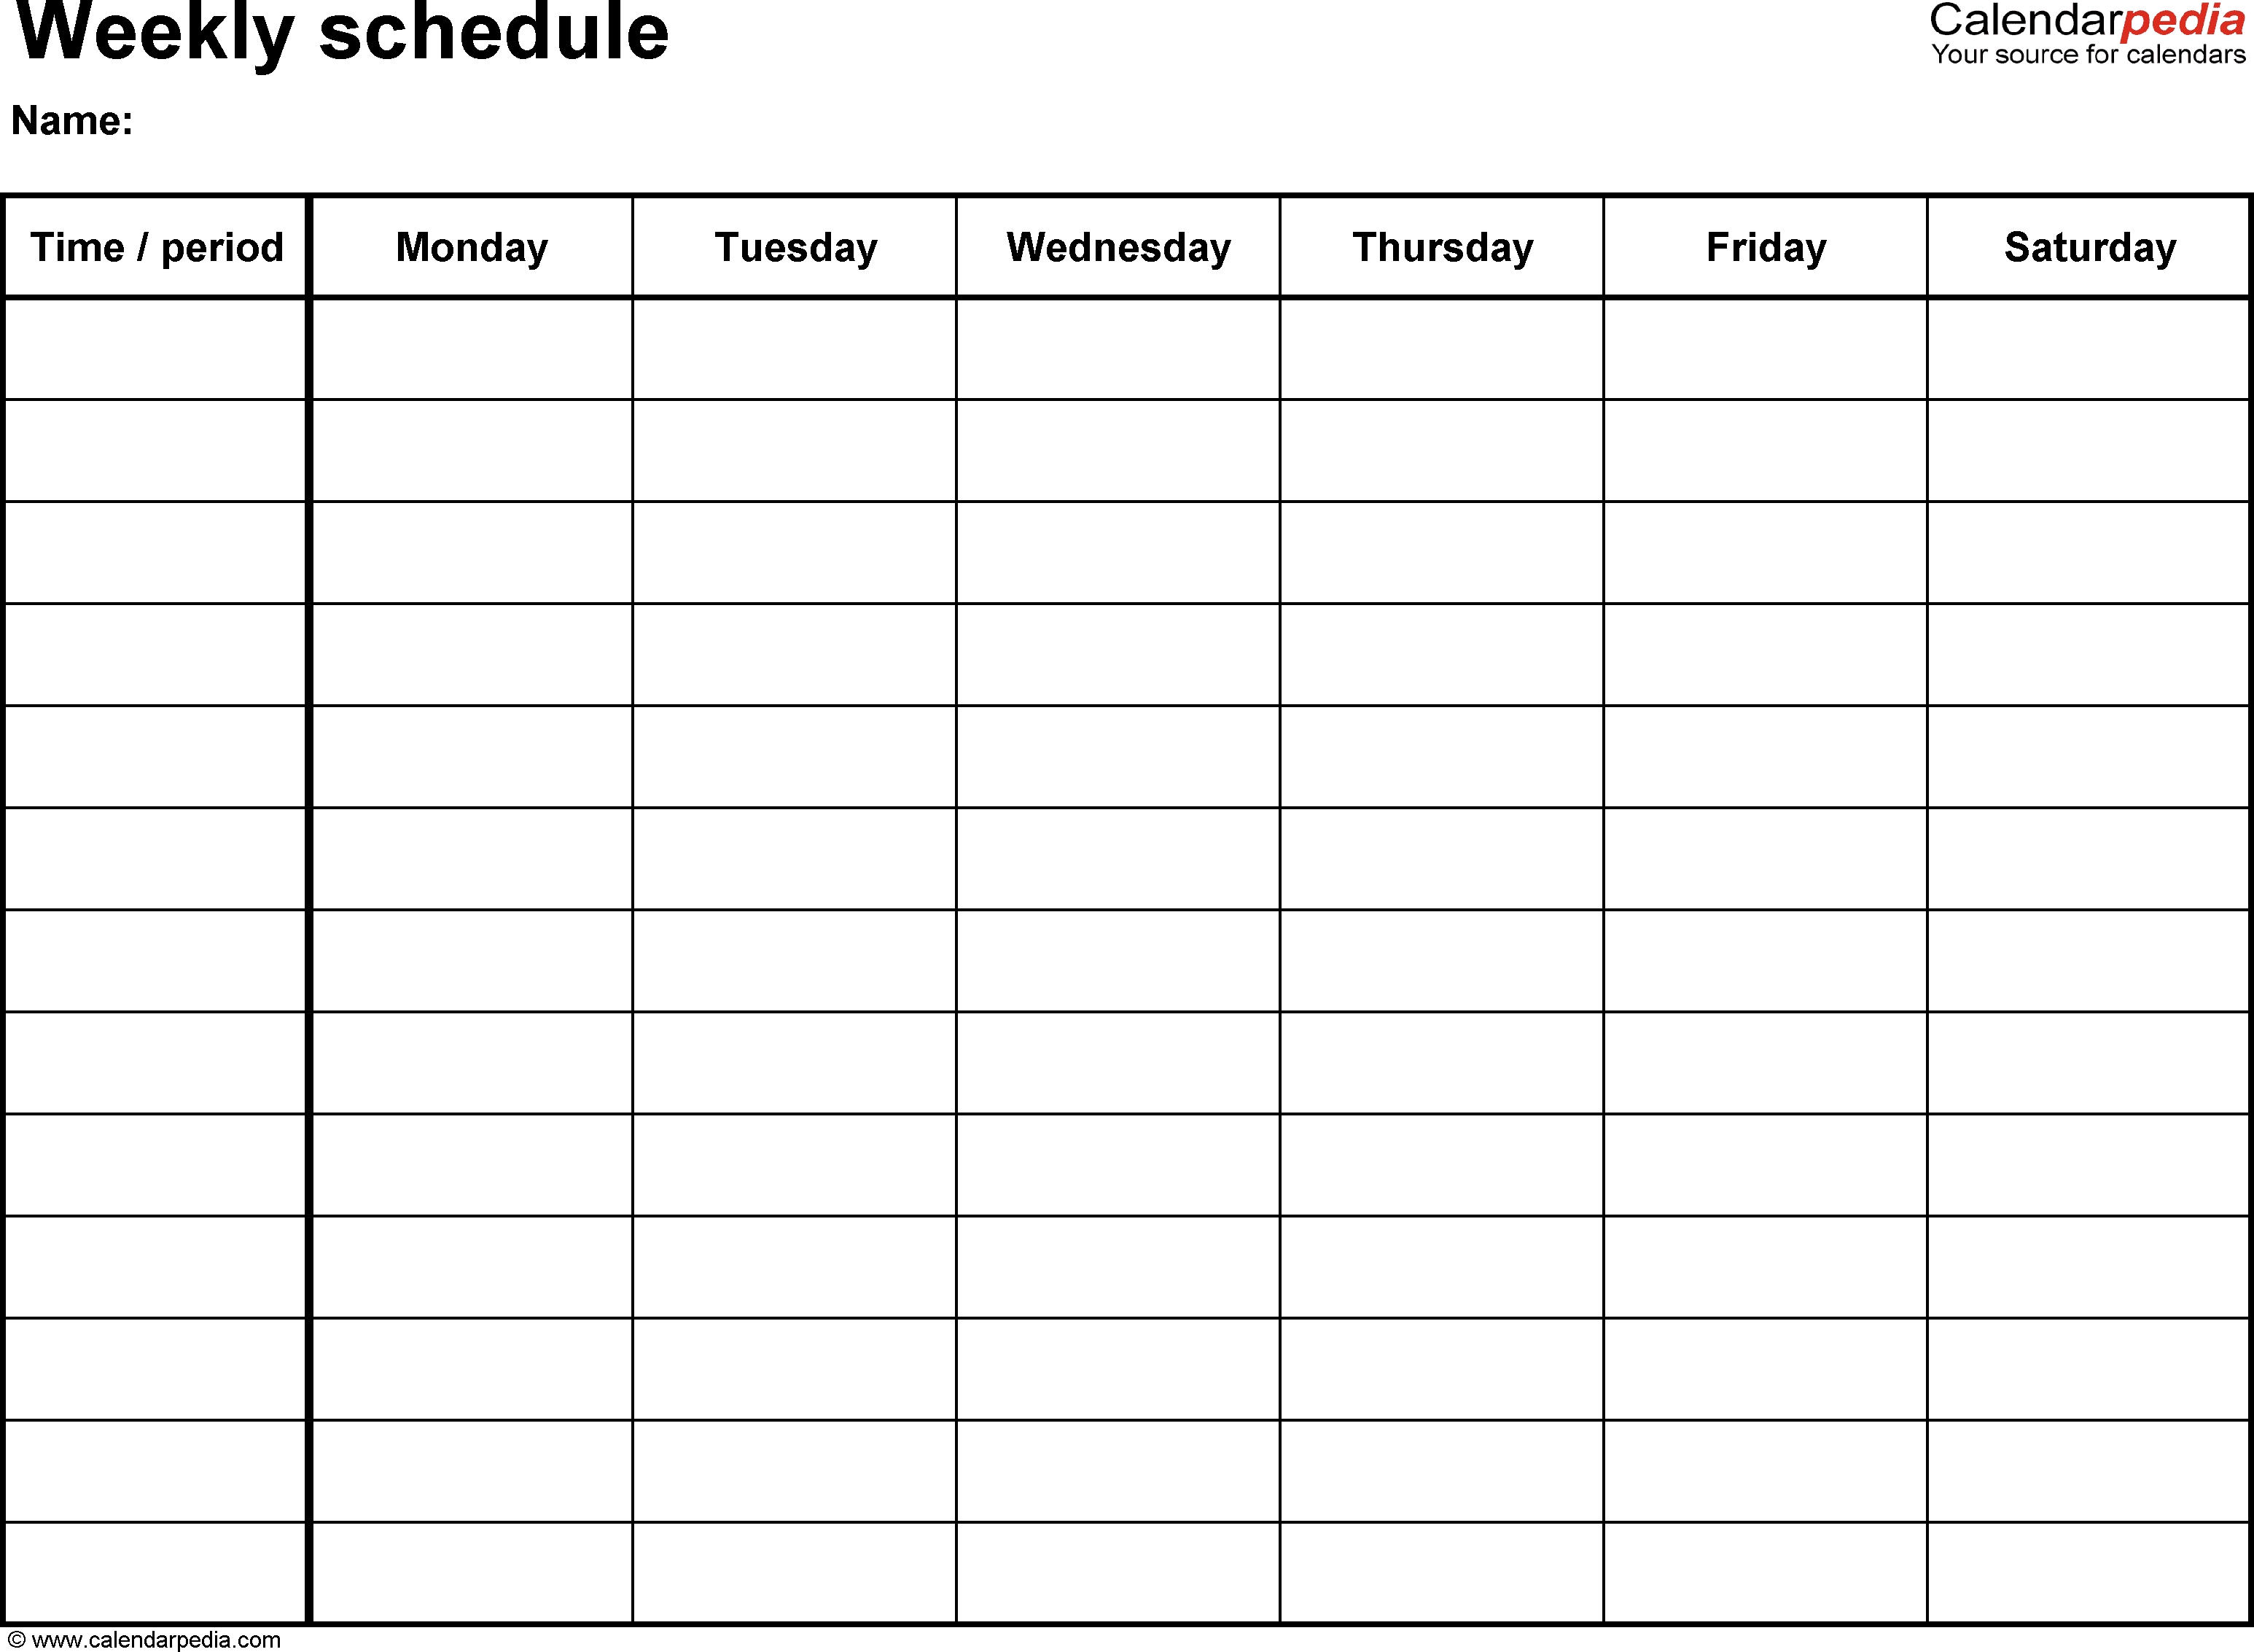 Free Weekly Schedule Templates For Pdf - 18 Templates for Calendar Weeks Printable No Datwes